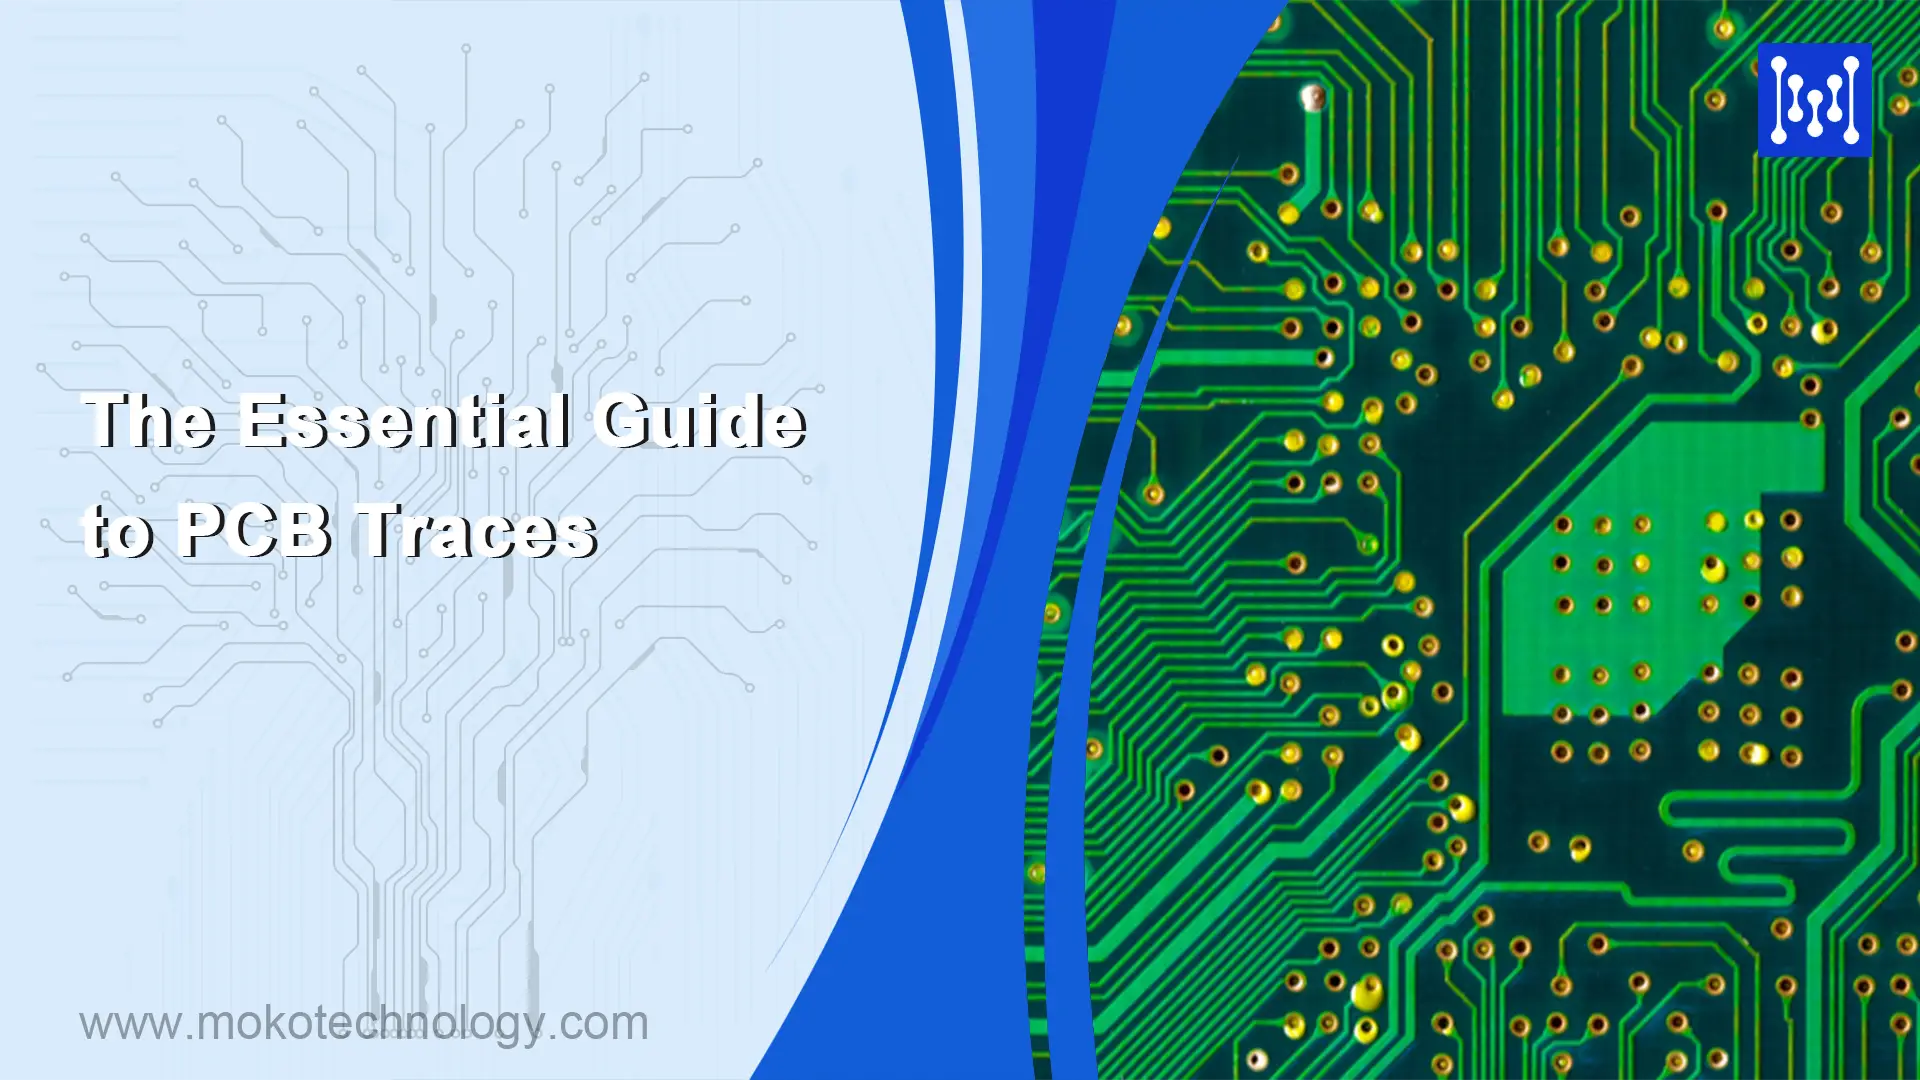 The Essential Guide to PCB Traces